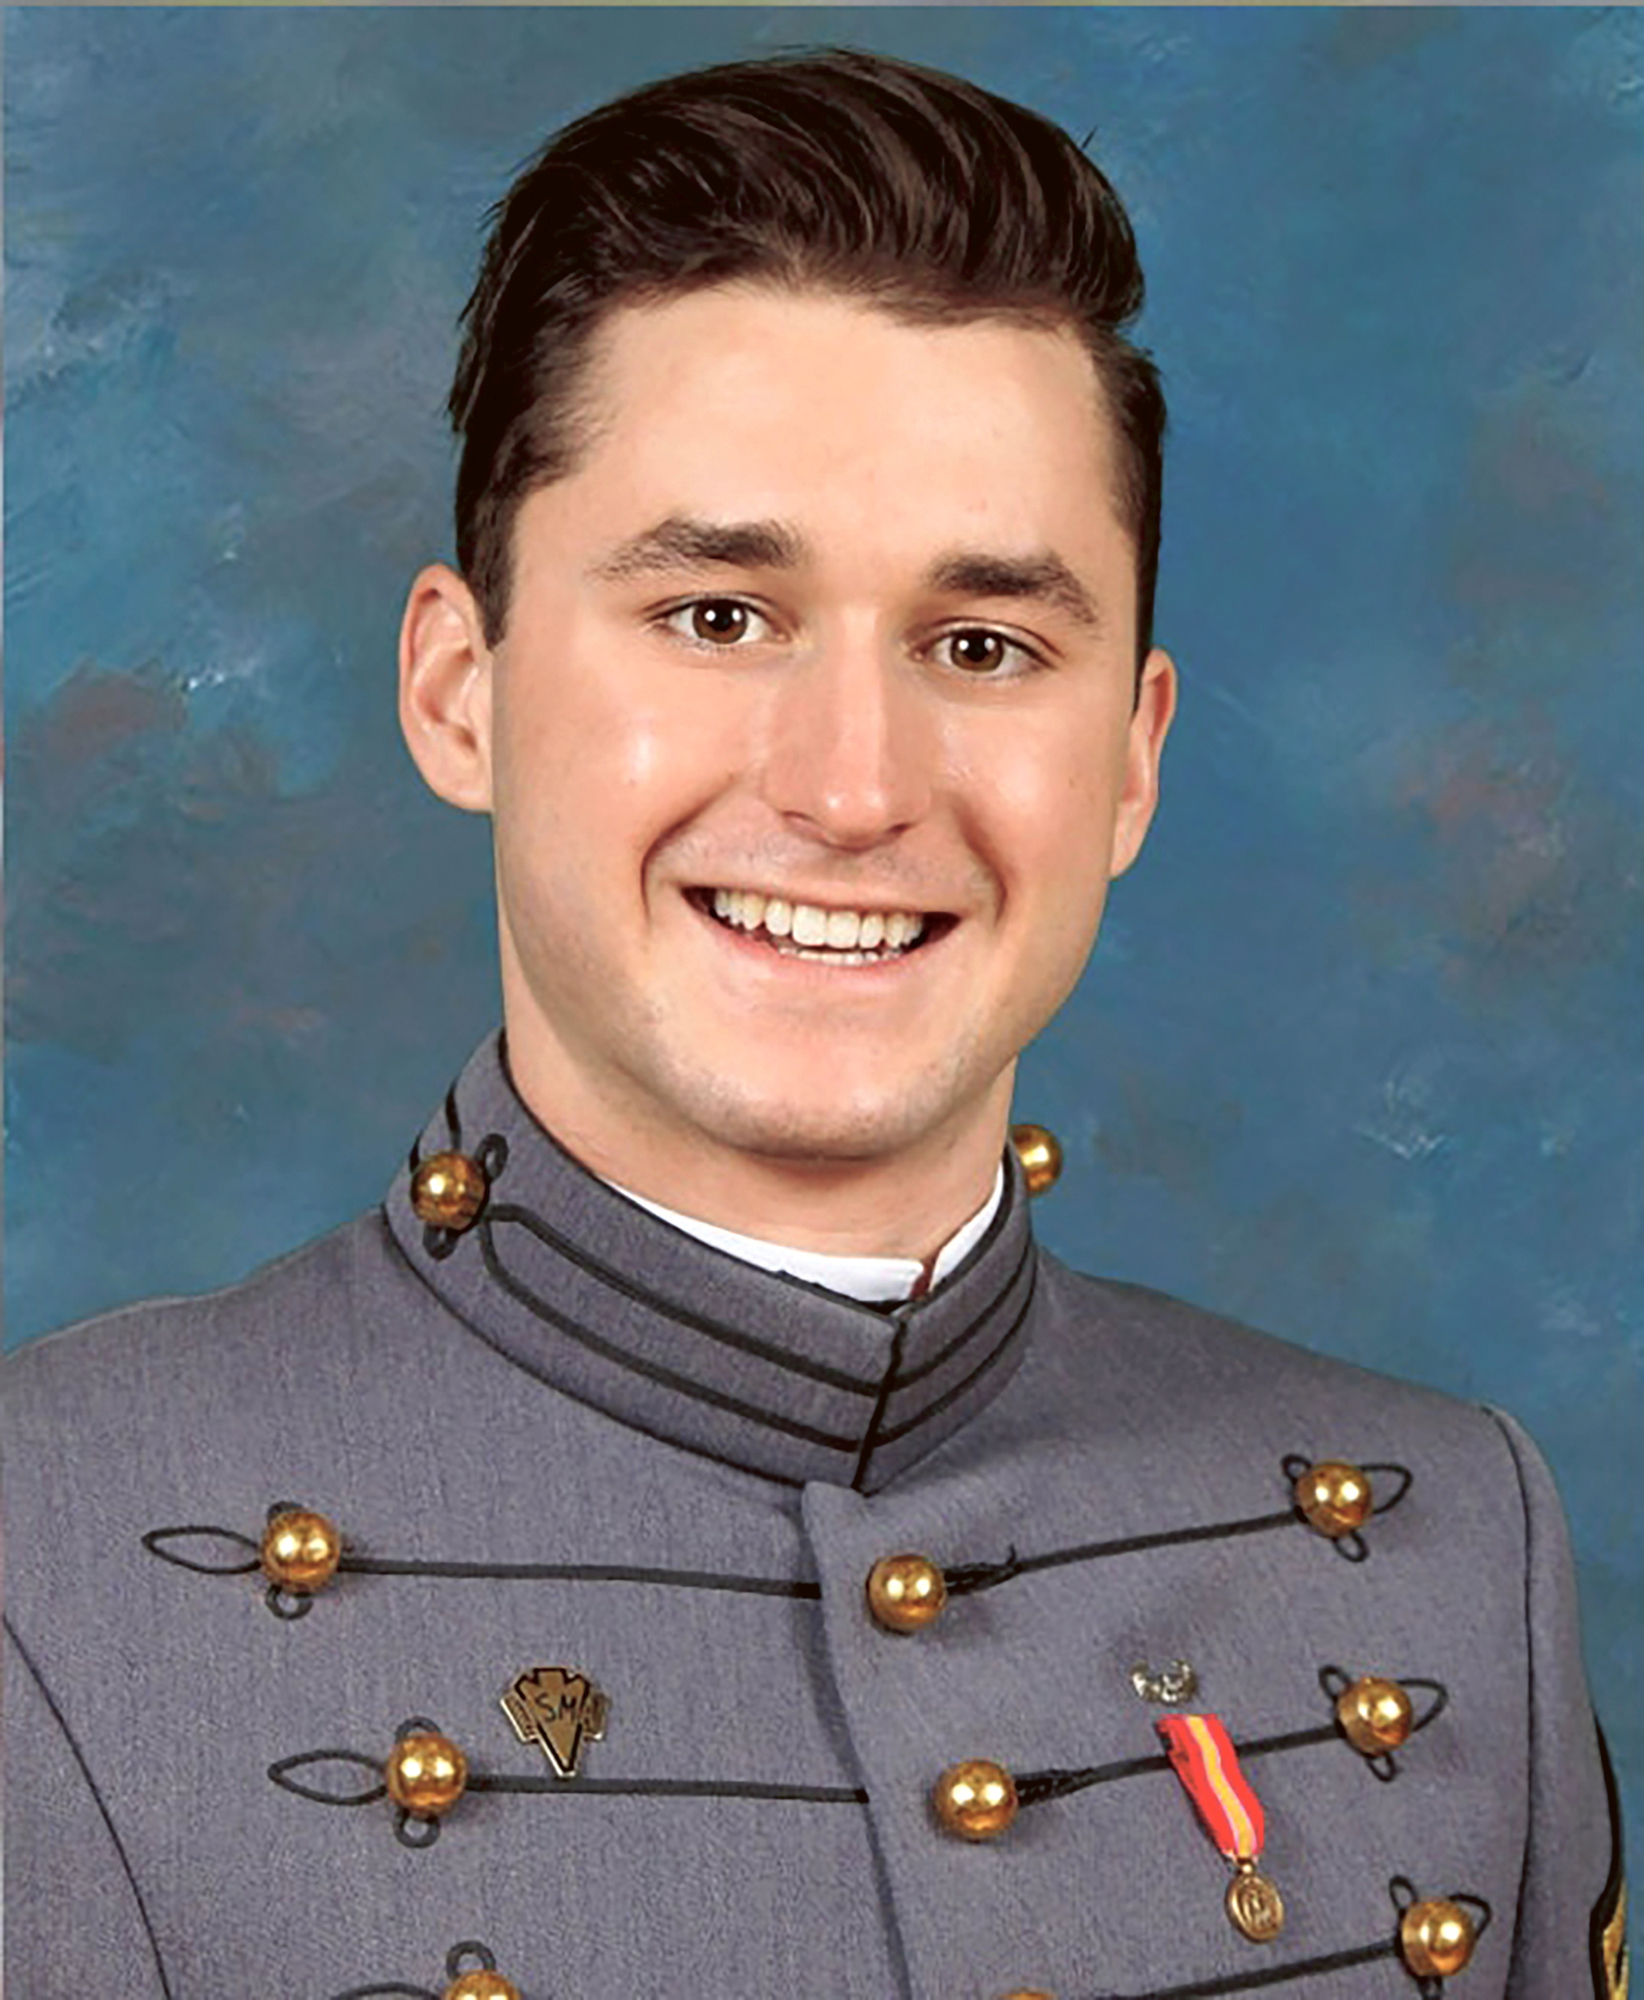 PROMOTION: Posthumously, Evan has been promoted to first lieutenant and recognized as a graduate of the prestigious United States Army Ranger school.